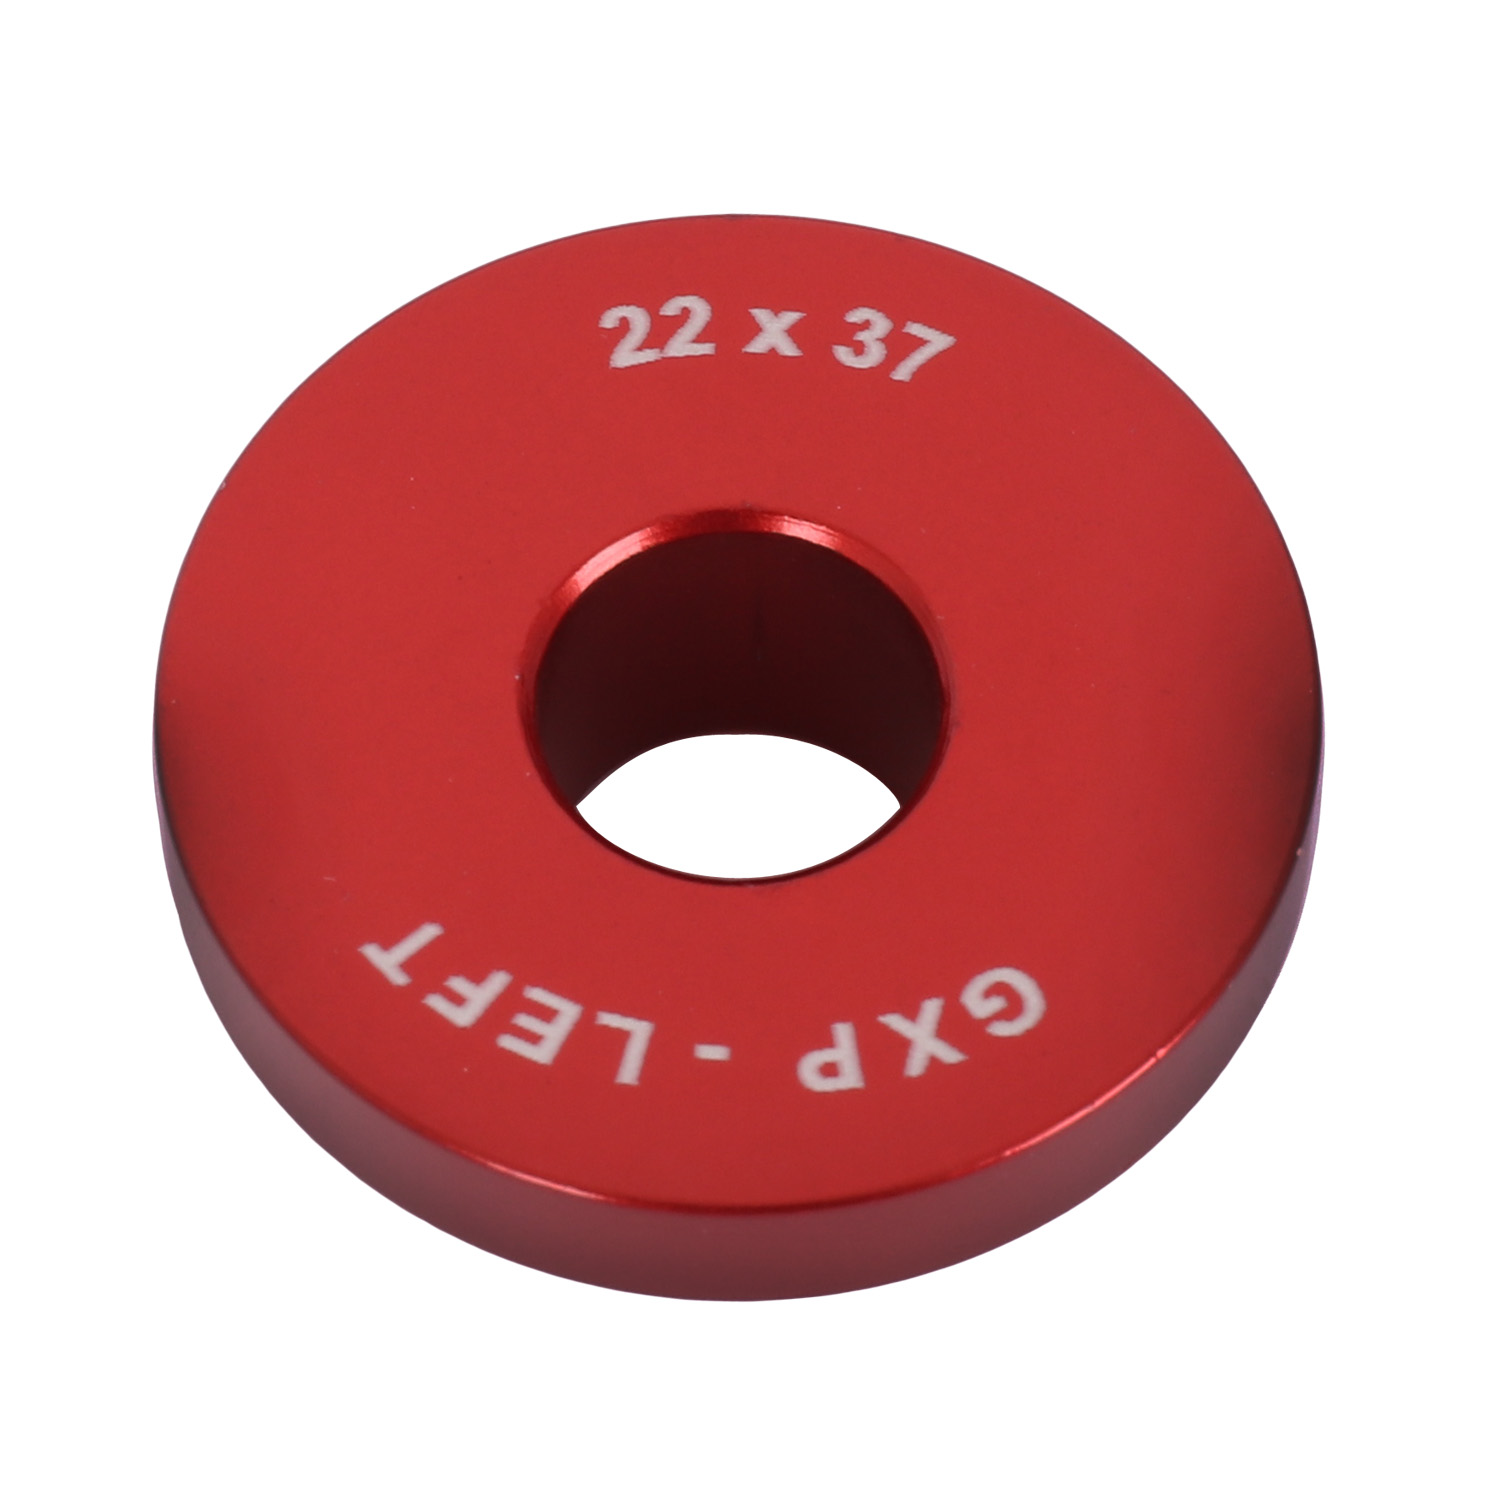 Picture of Wheels Manufacturing Drift Adapter for Sealed Bearings - BP0014 | Open Bore | BB 22x37mm (GXP)